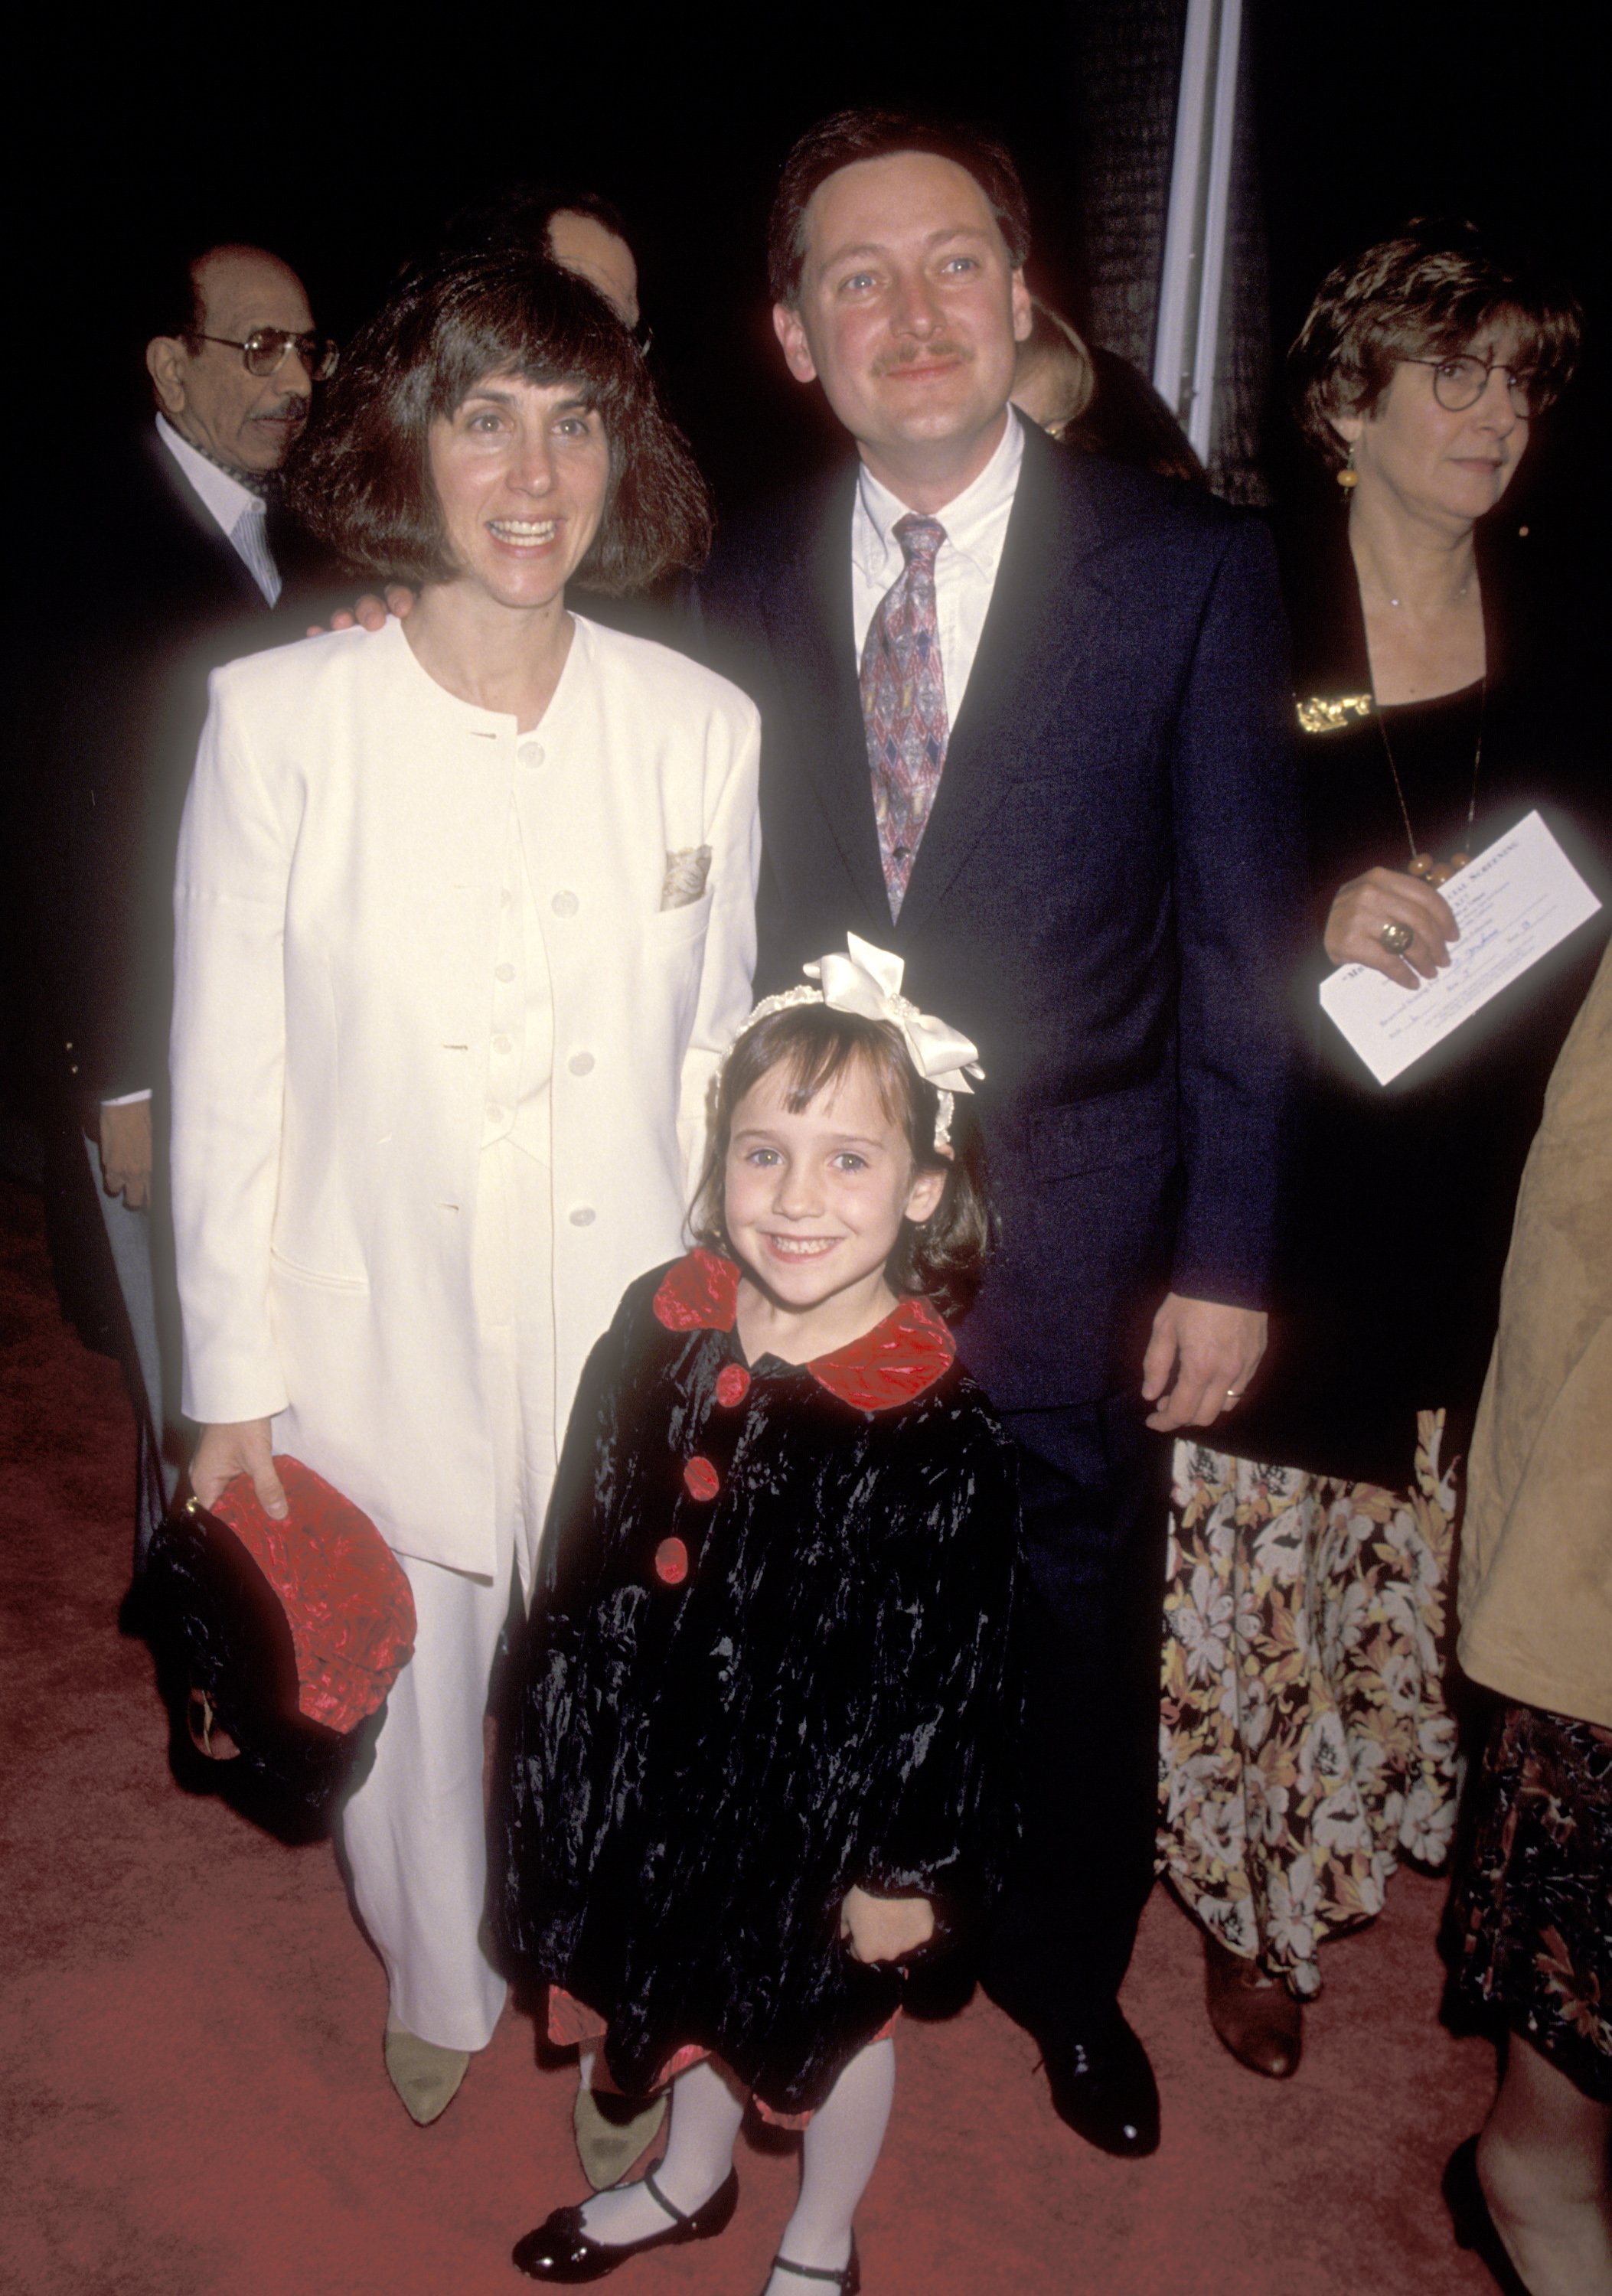 Suzie Shapiro, Michael Wilson, and Mara Wilson at the "Mrs. Doubtfire" Beverly Hills premiere on November 22, 1993, in Beverly Hills, California | Photo: Ron Galella, Ltd./Ron Galella Collection/Getty Images